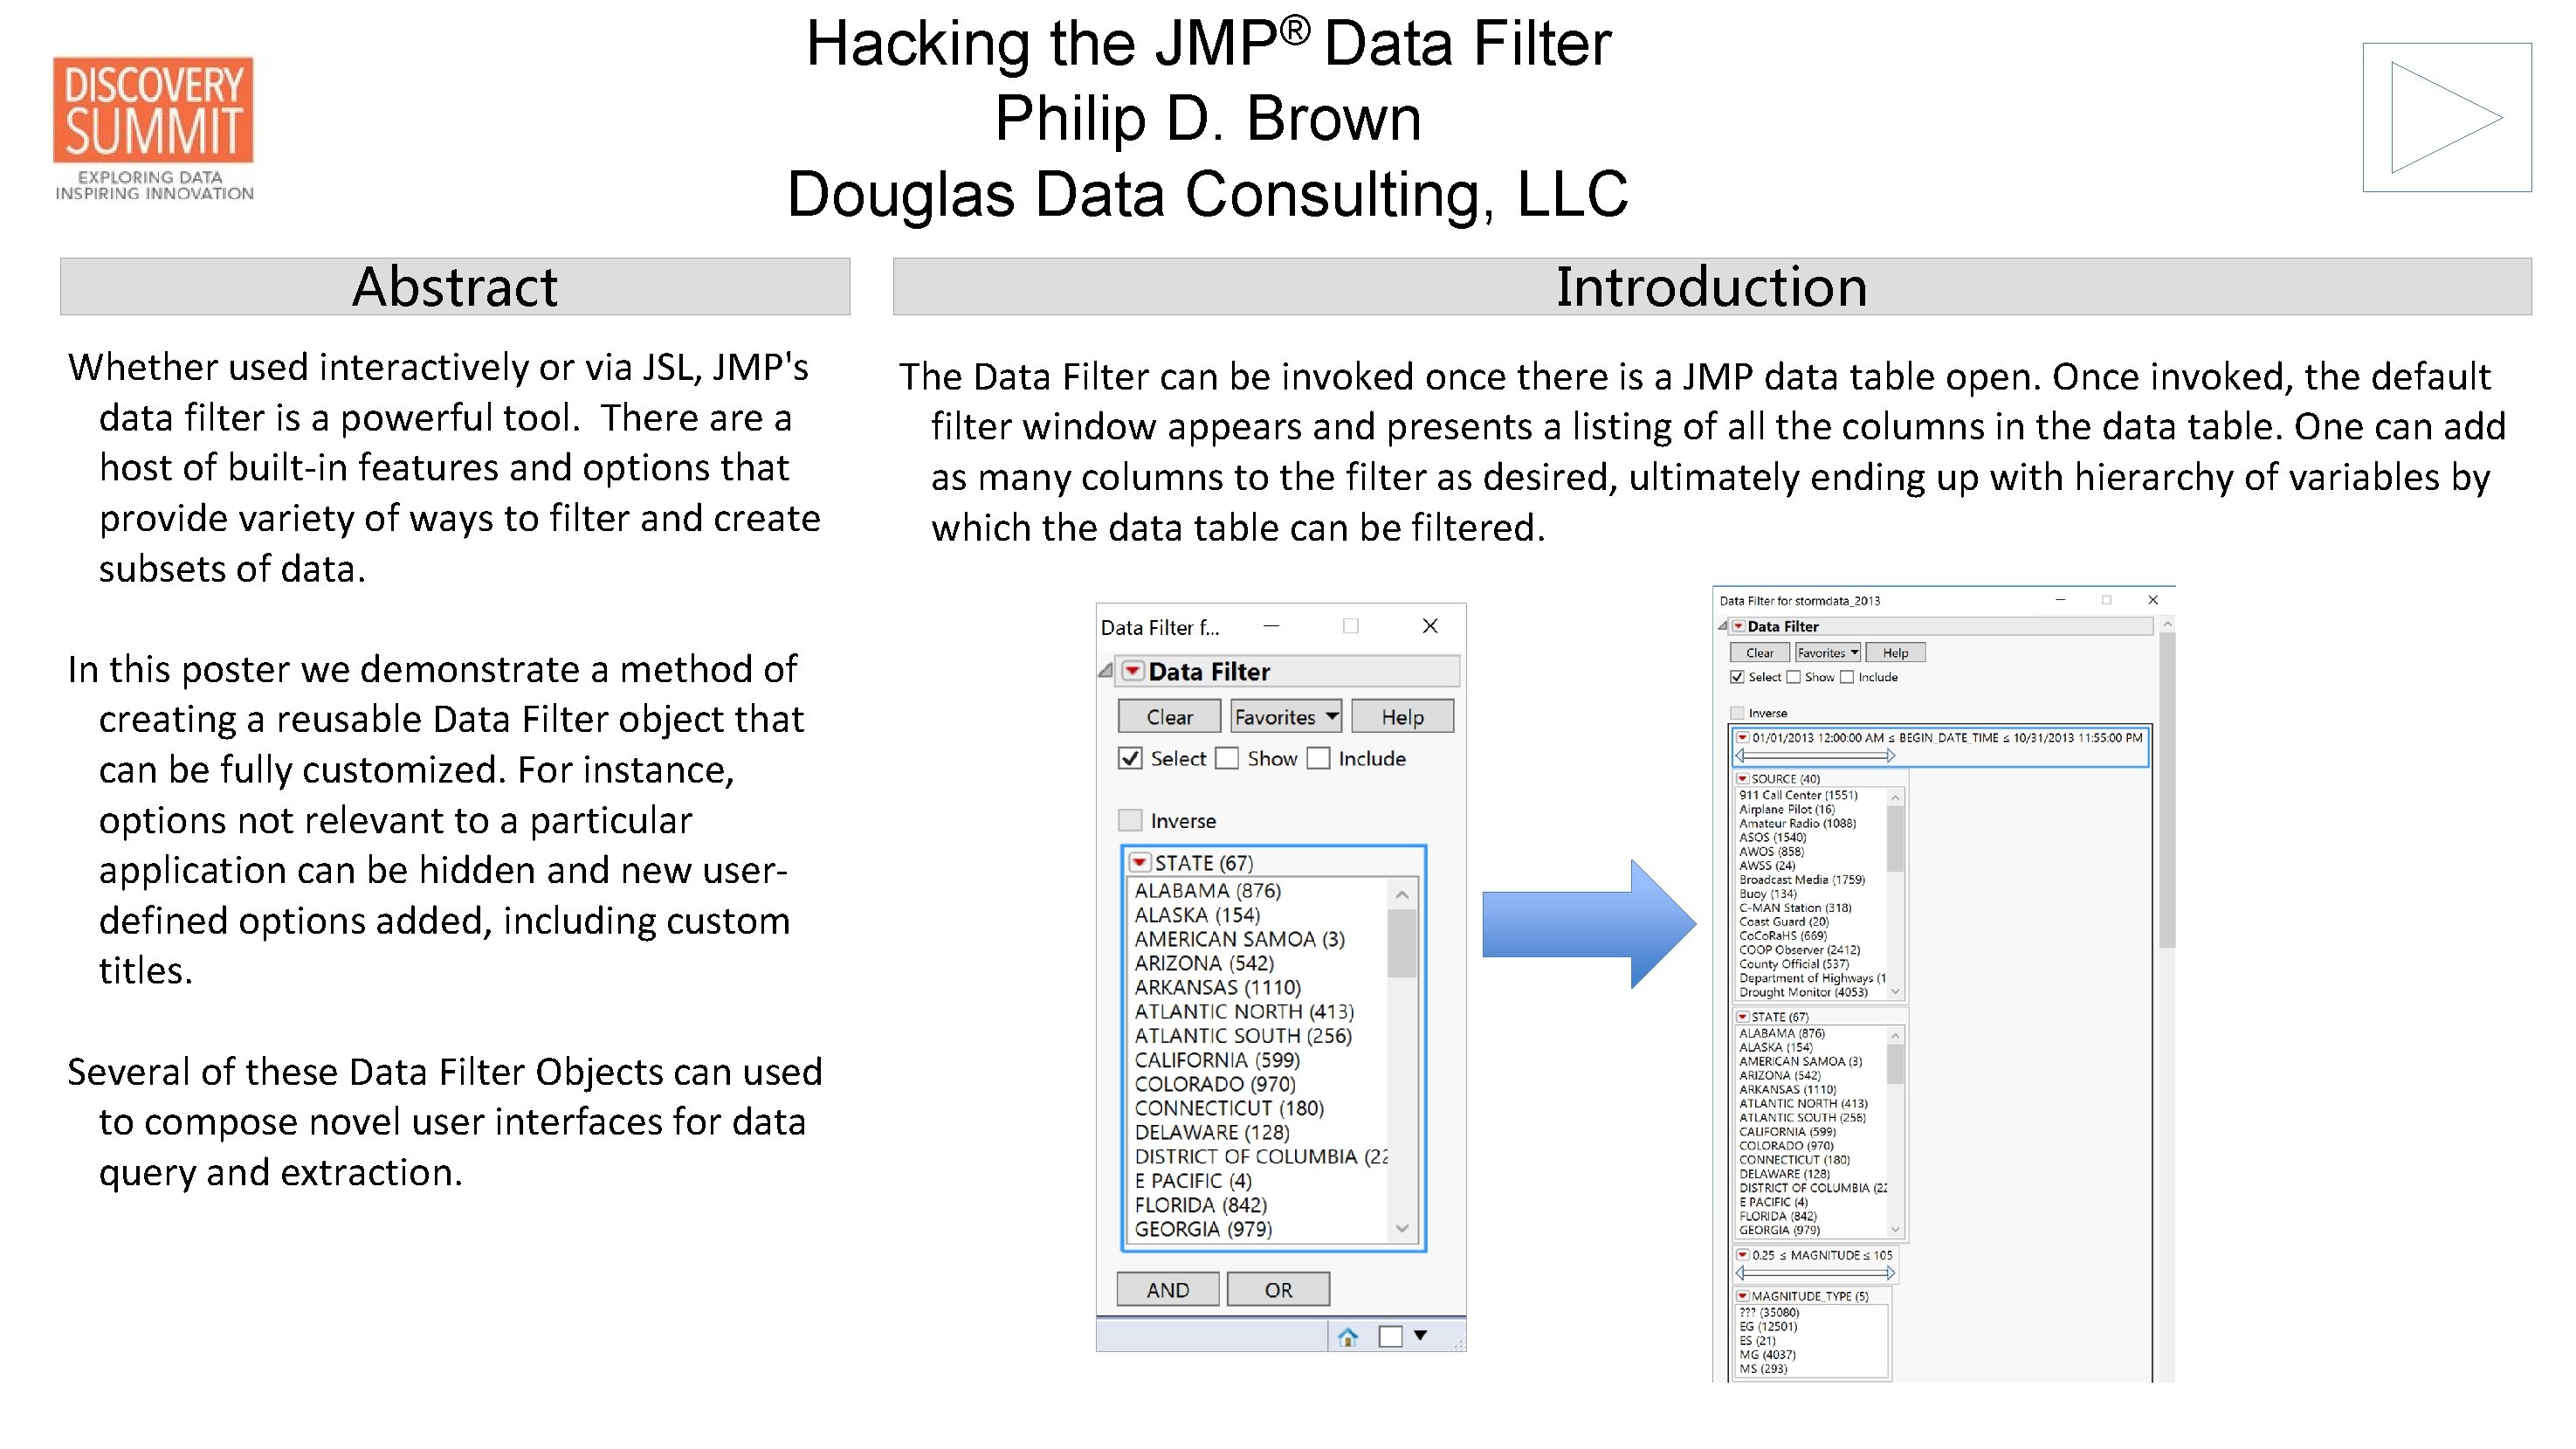 ® JMP Data Hacking the Filter Philip D. Brown Douglas Data Consulting, LLC Abstract